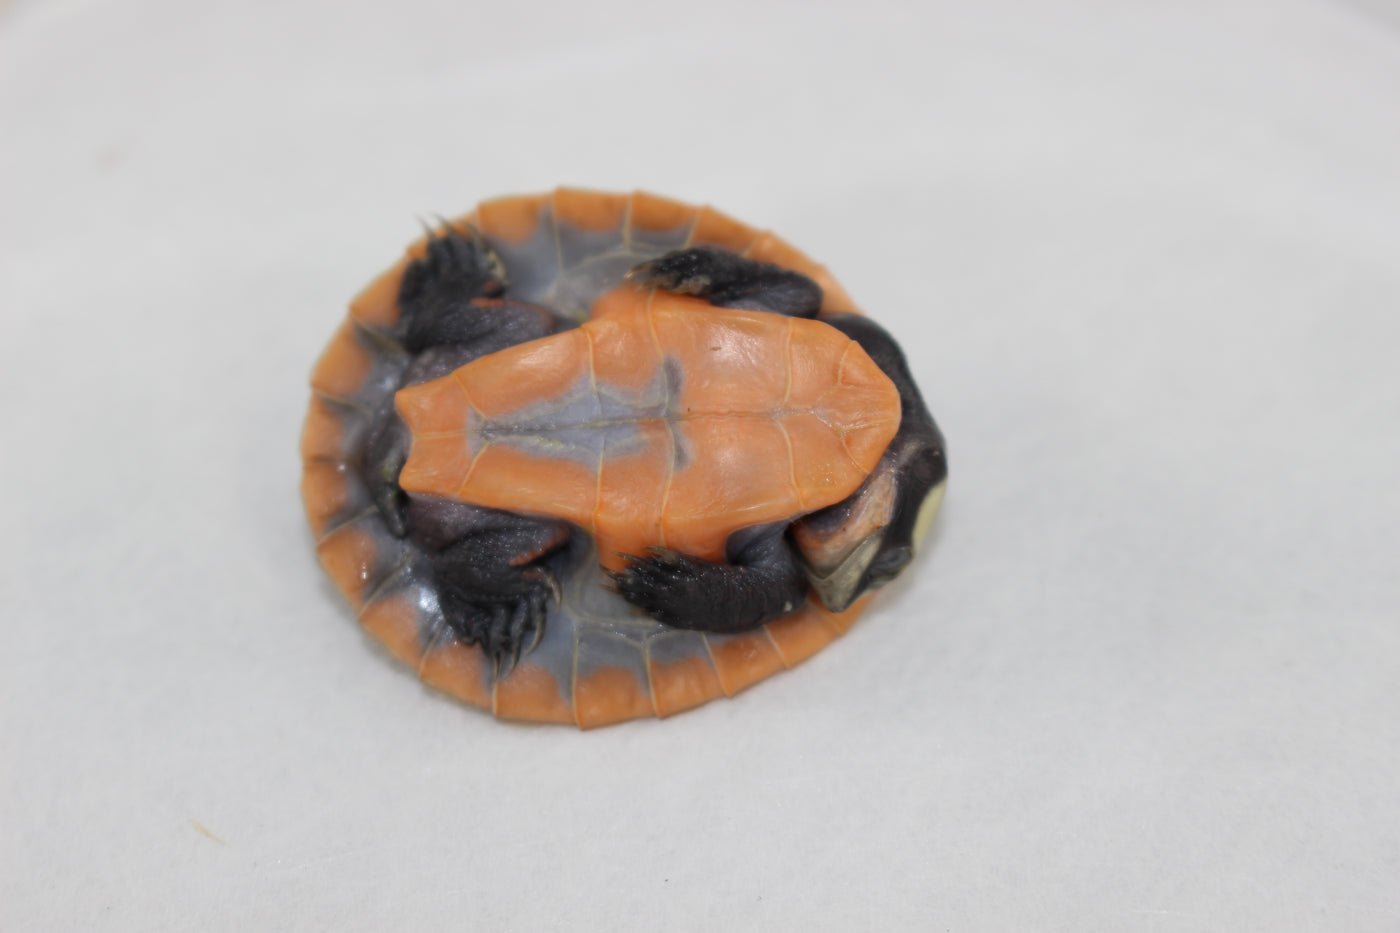 pinkbelly sideneck turtle for sale, buy reptiles online